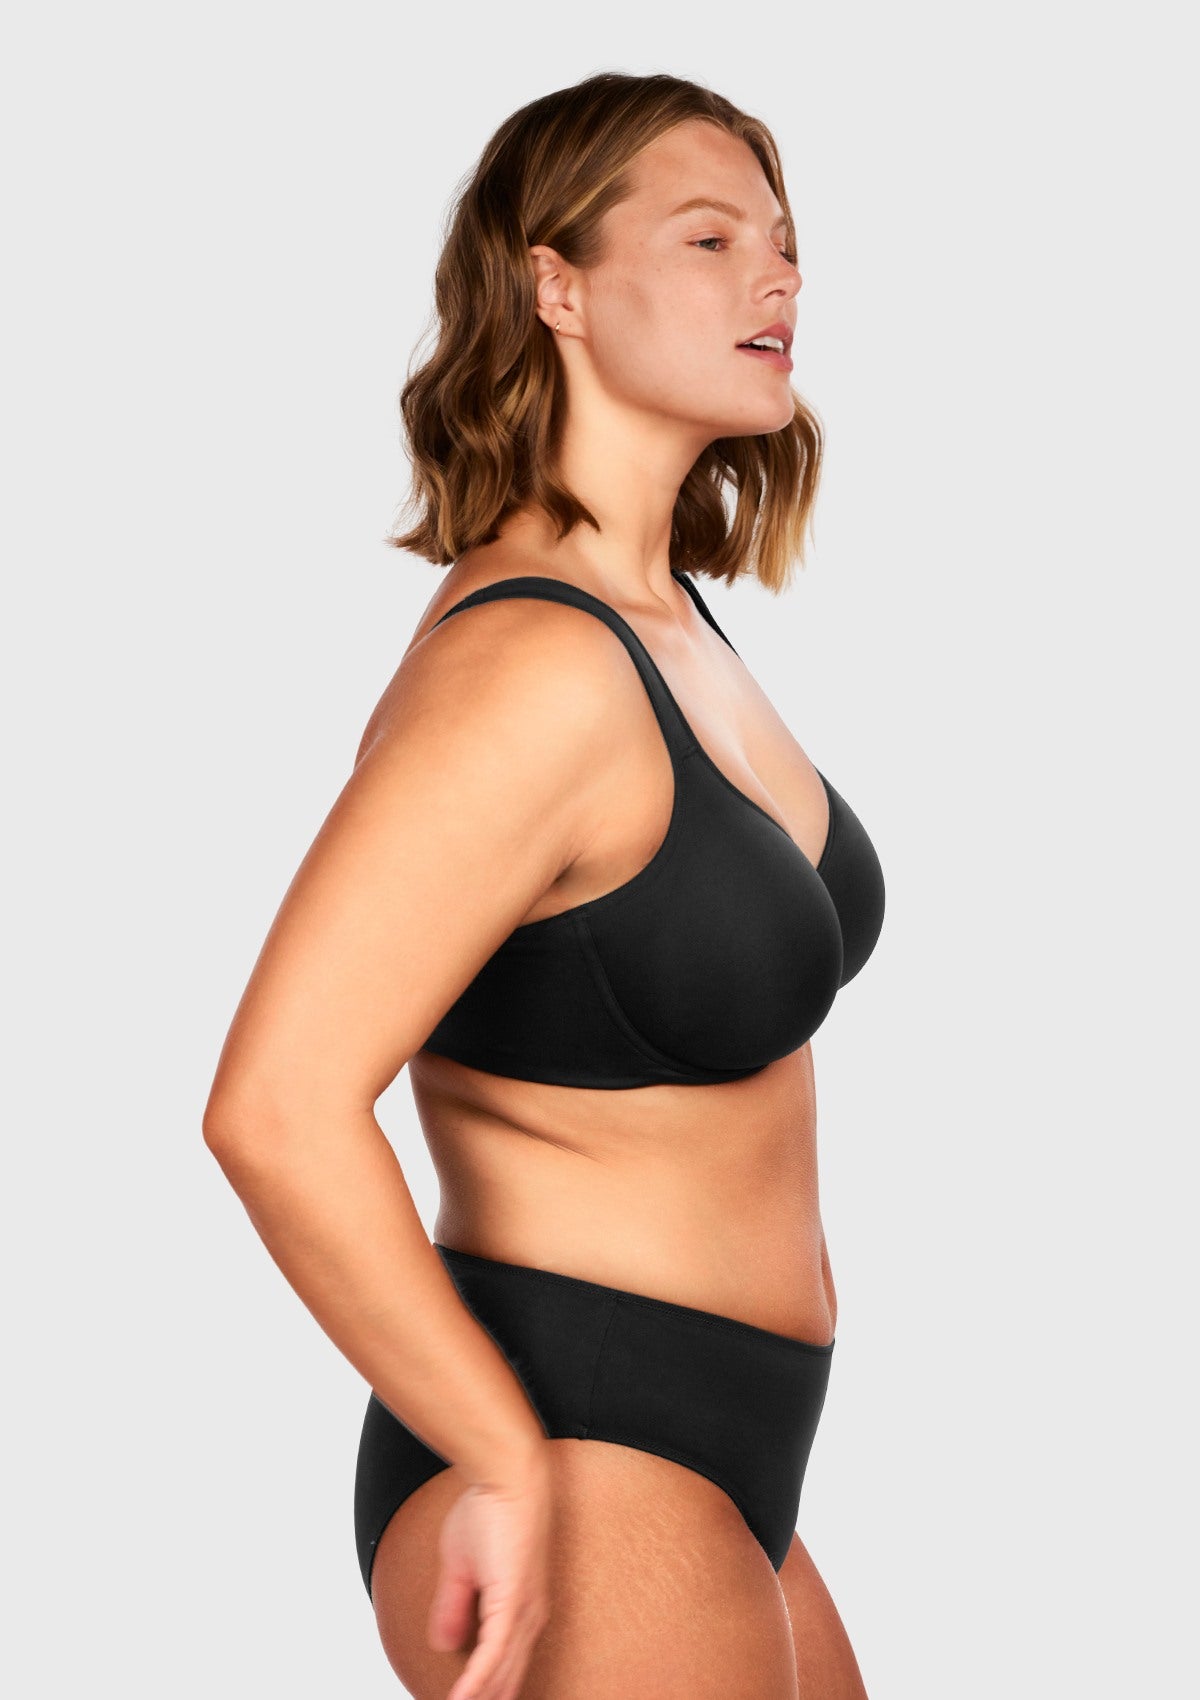 HSIA Joan Soft T-shirt Unlined Non-Padded Soft Cup Minimizer Bra - Black / 34 / C